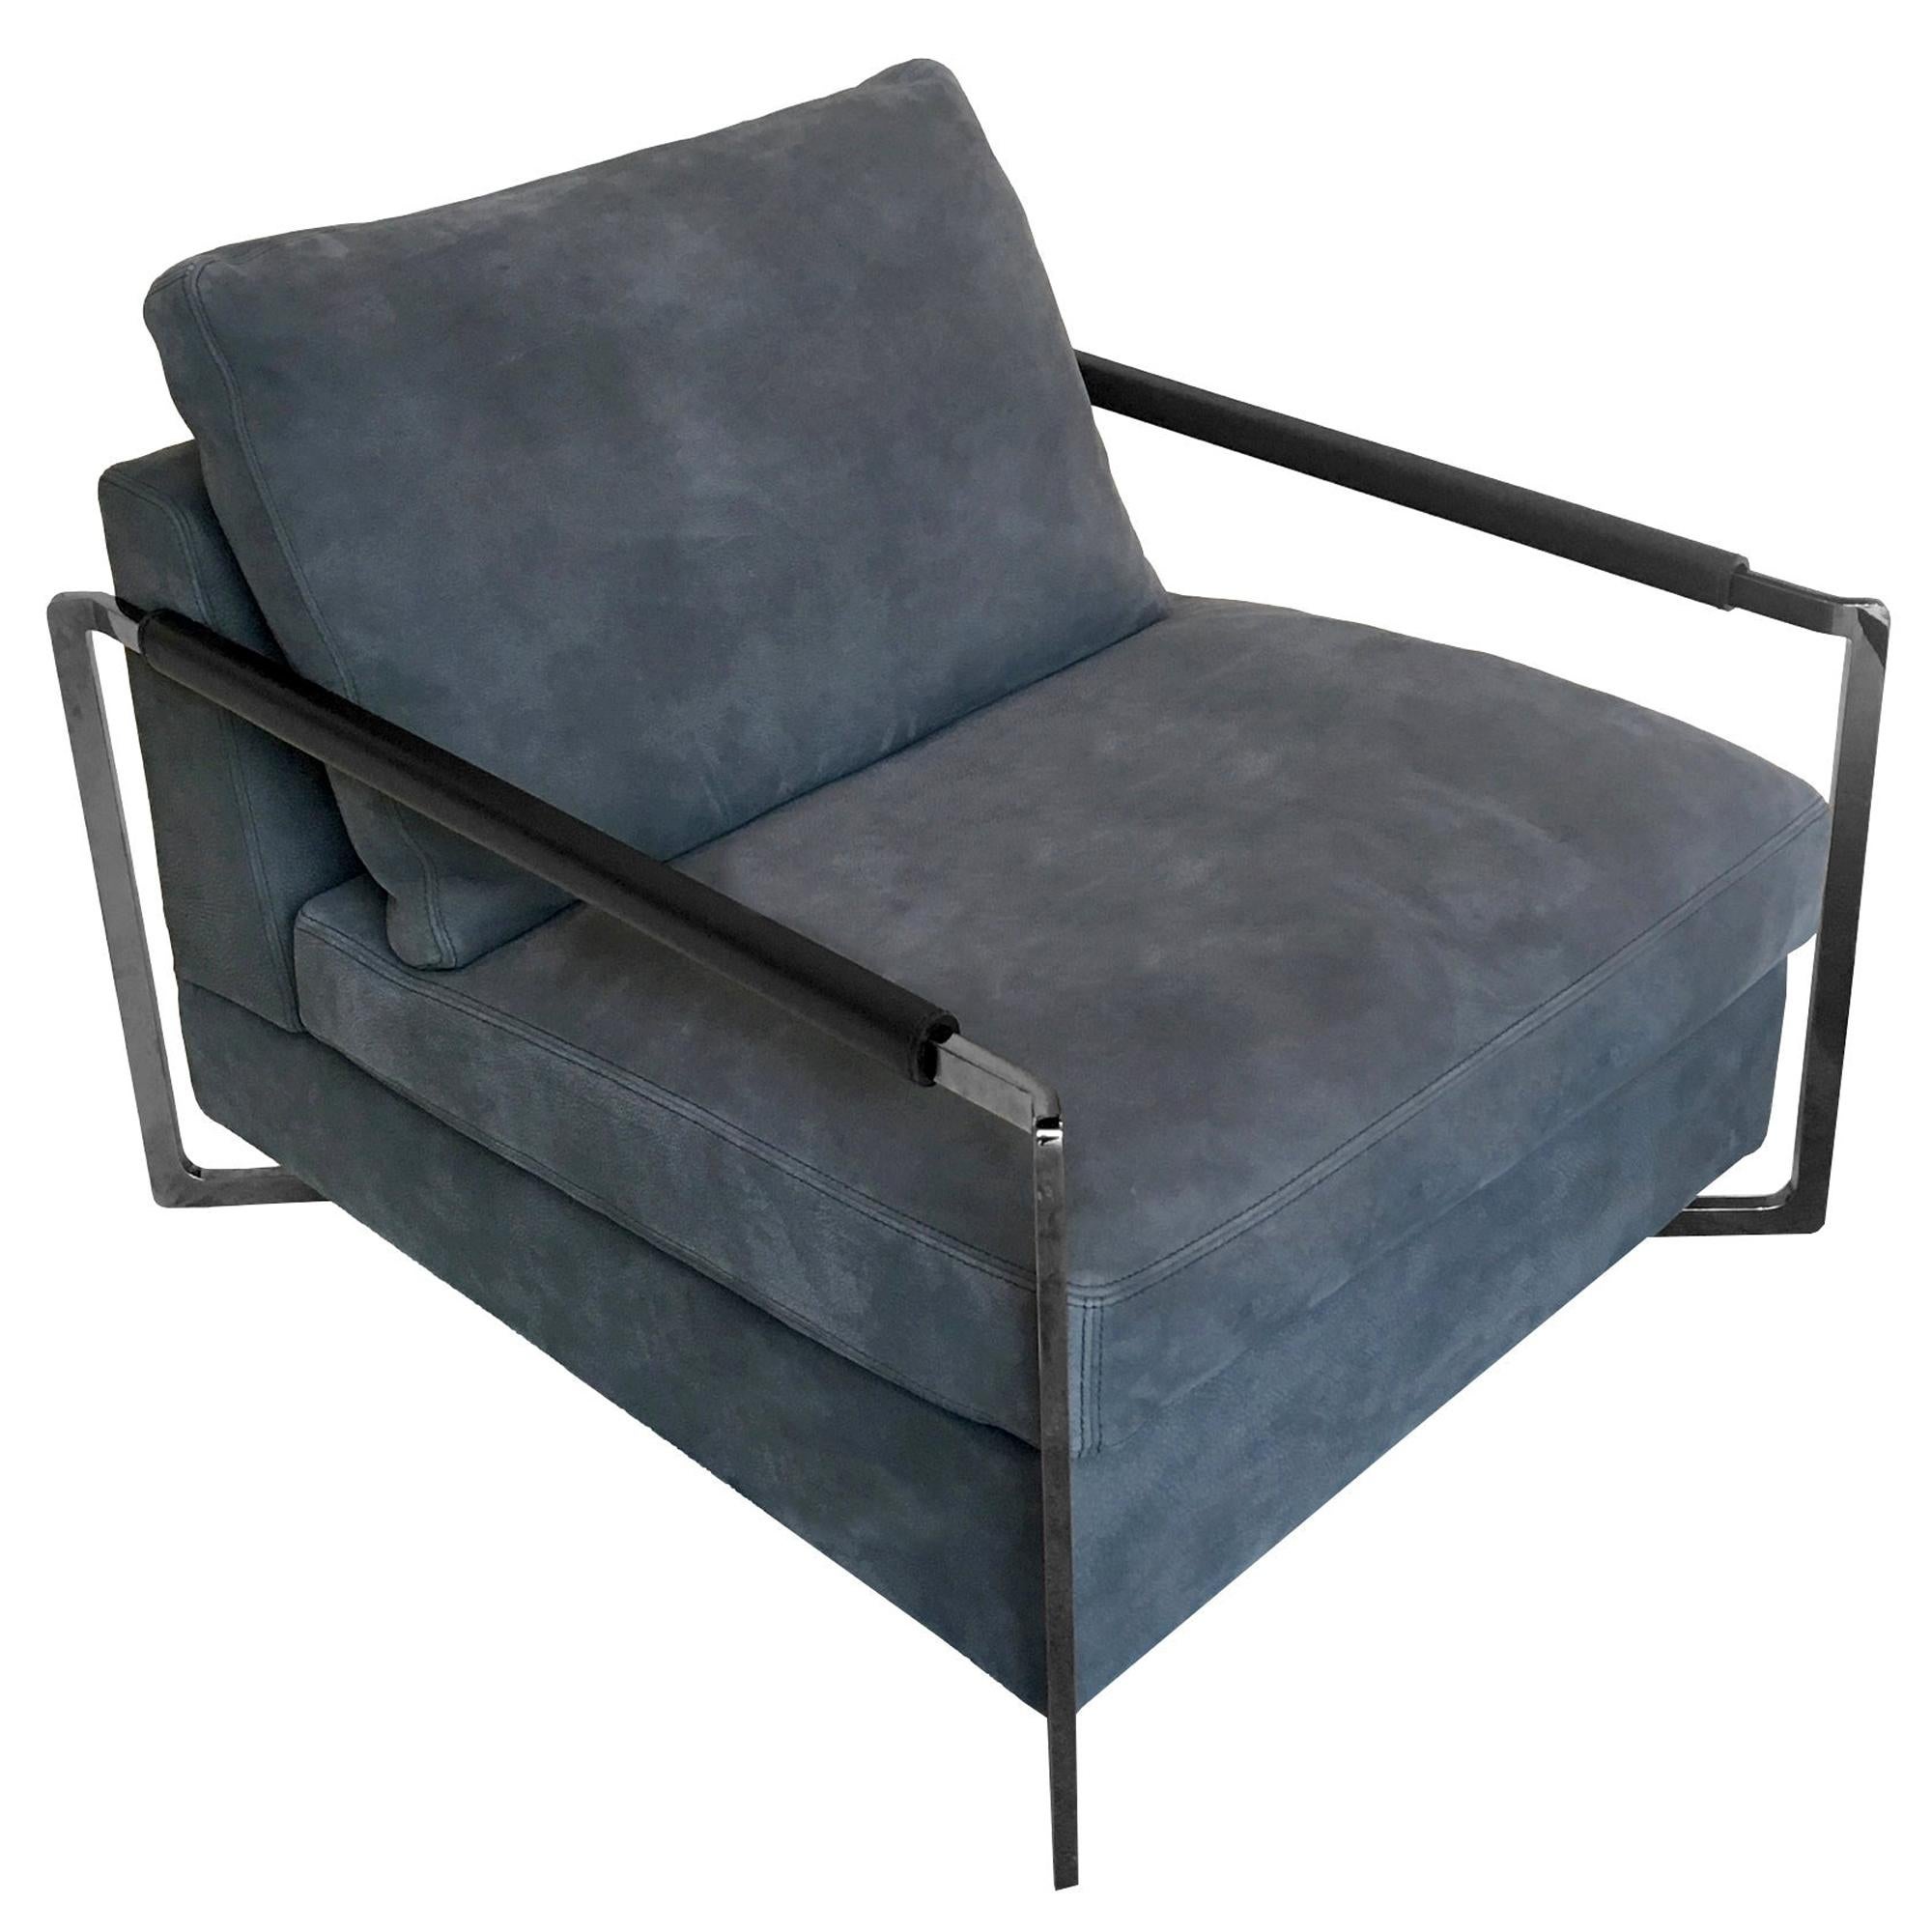 In Stock in Los Angeles, No Logo Grey Armchair by Sergio Bicego, Made in Italy